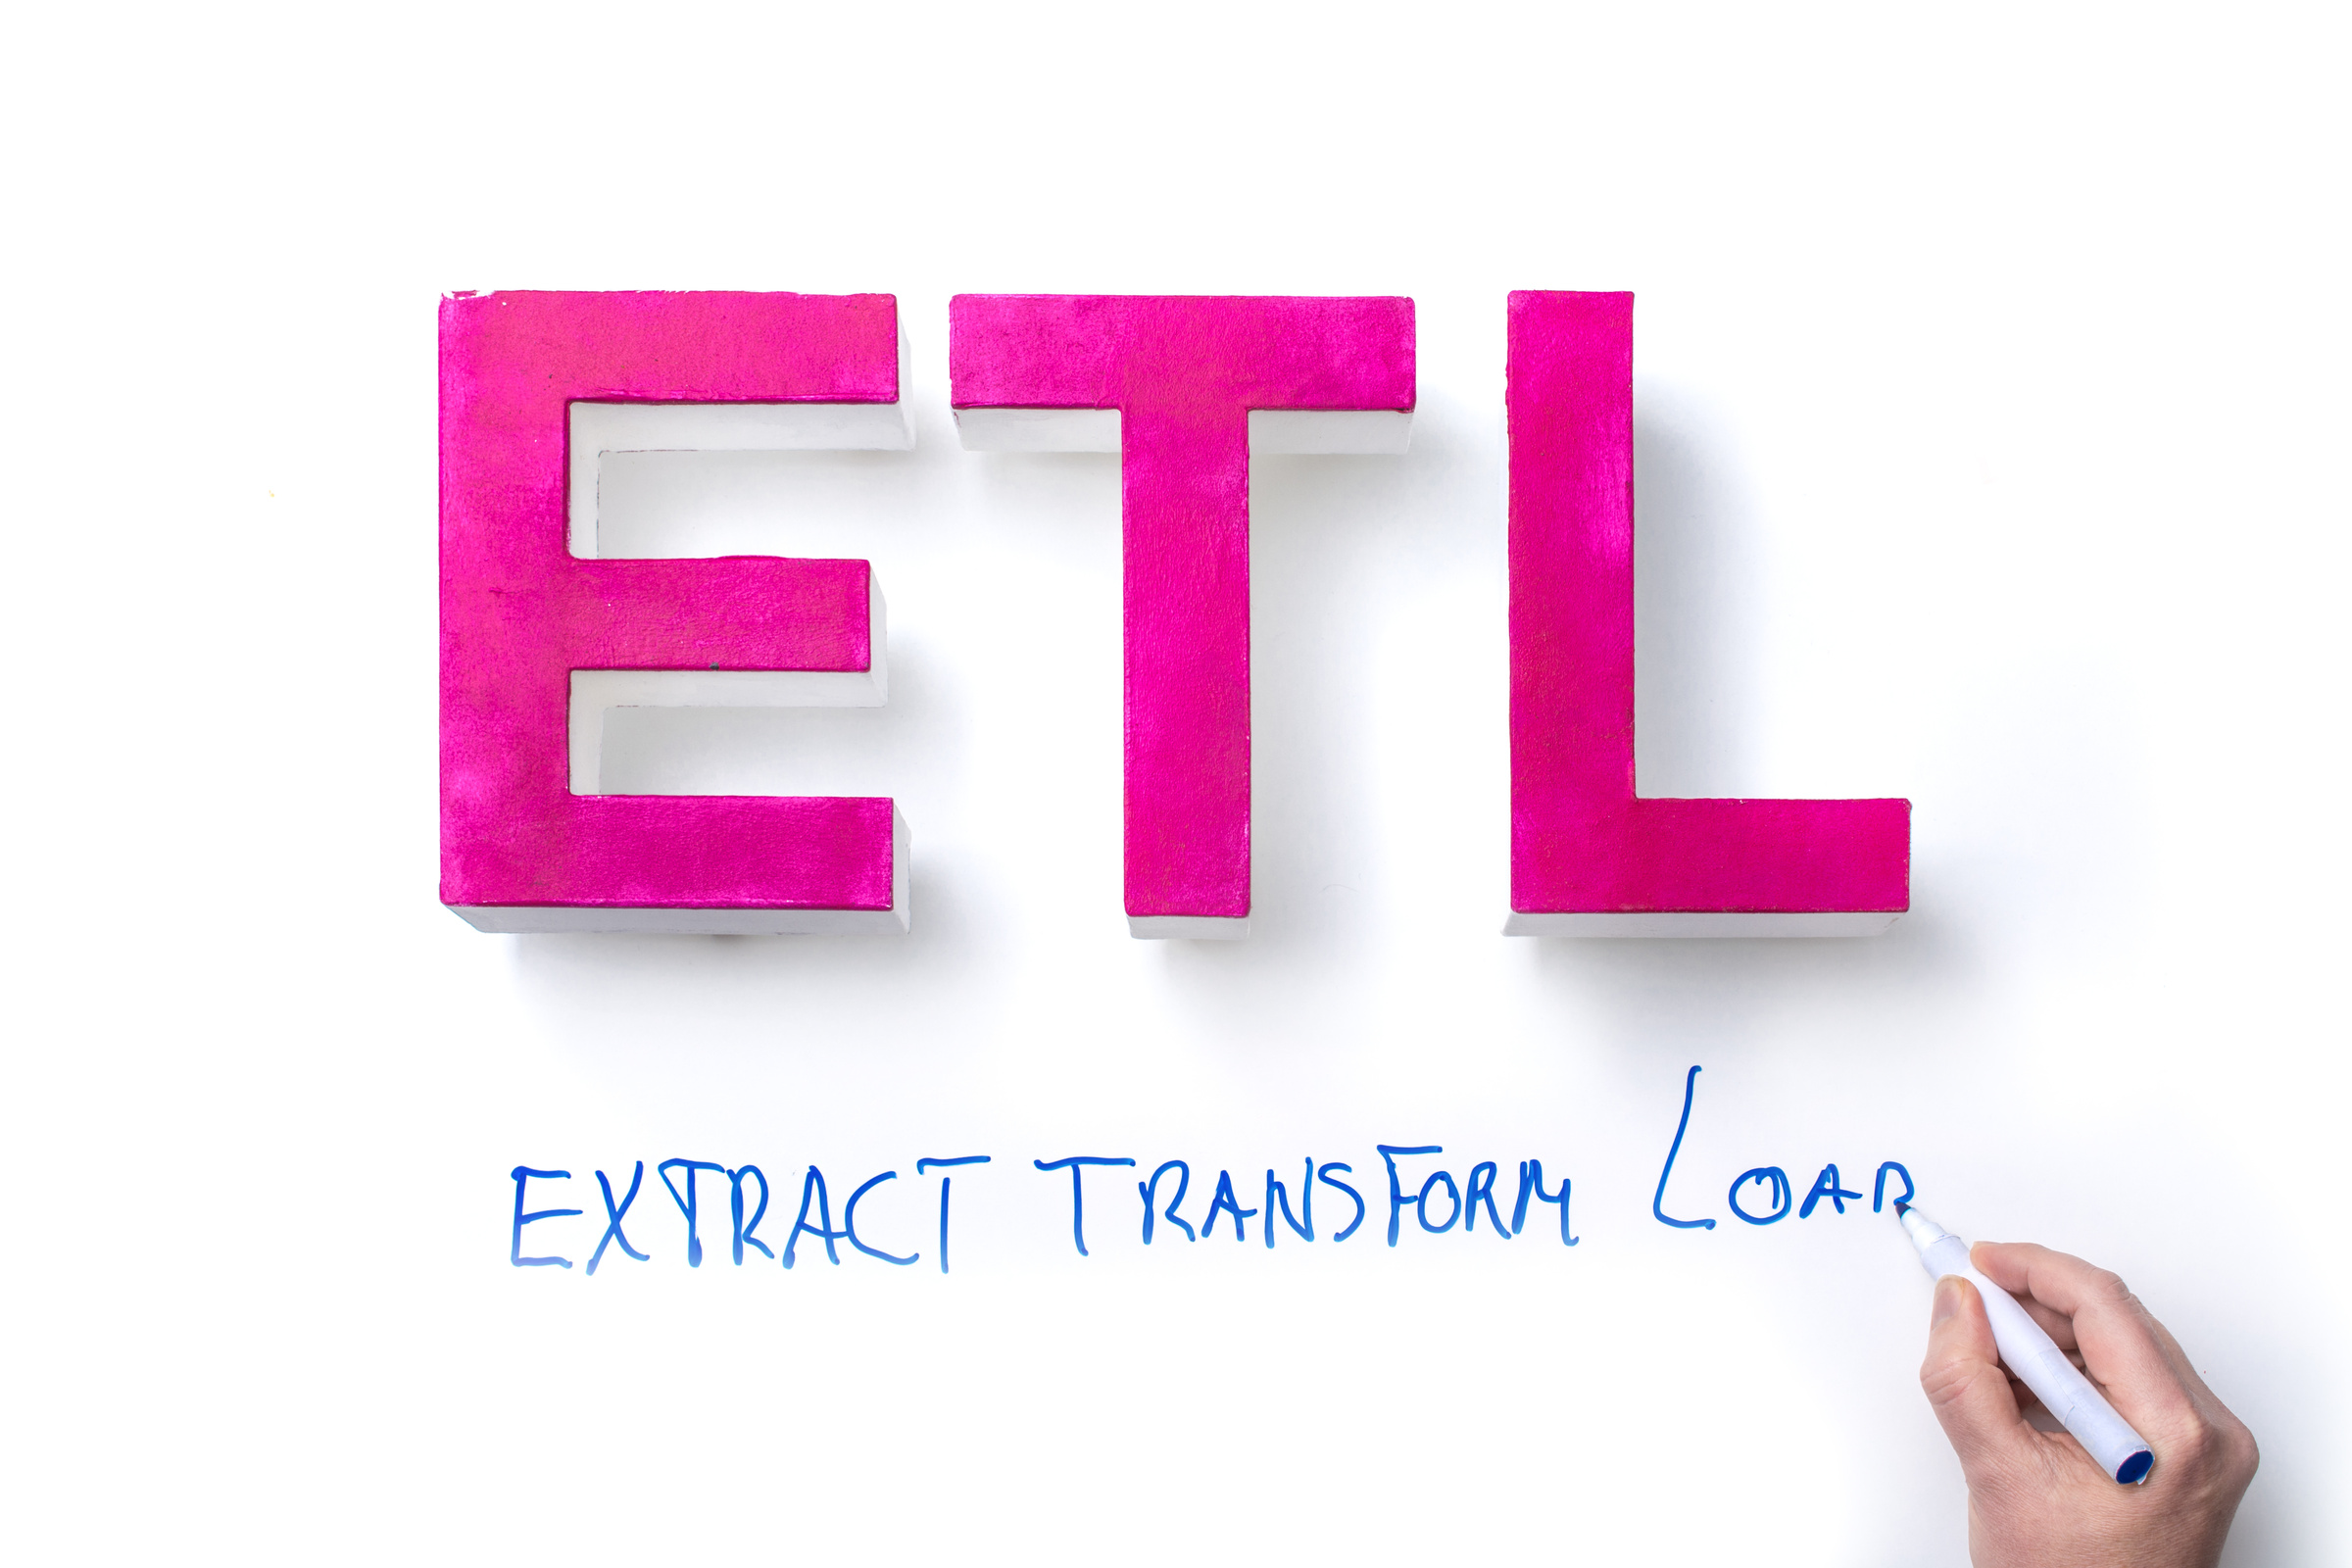 Extract Transform Load